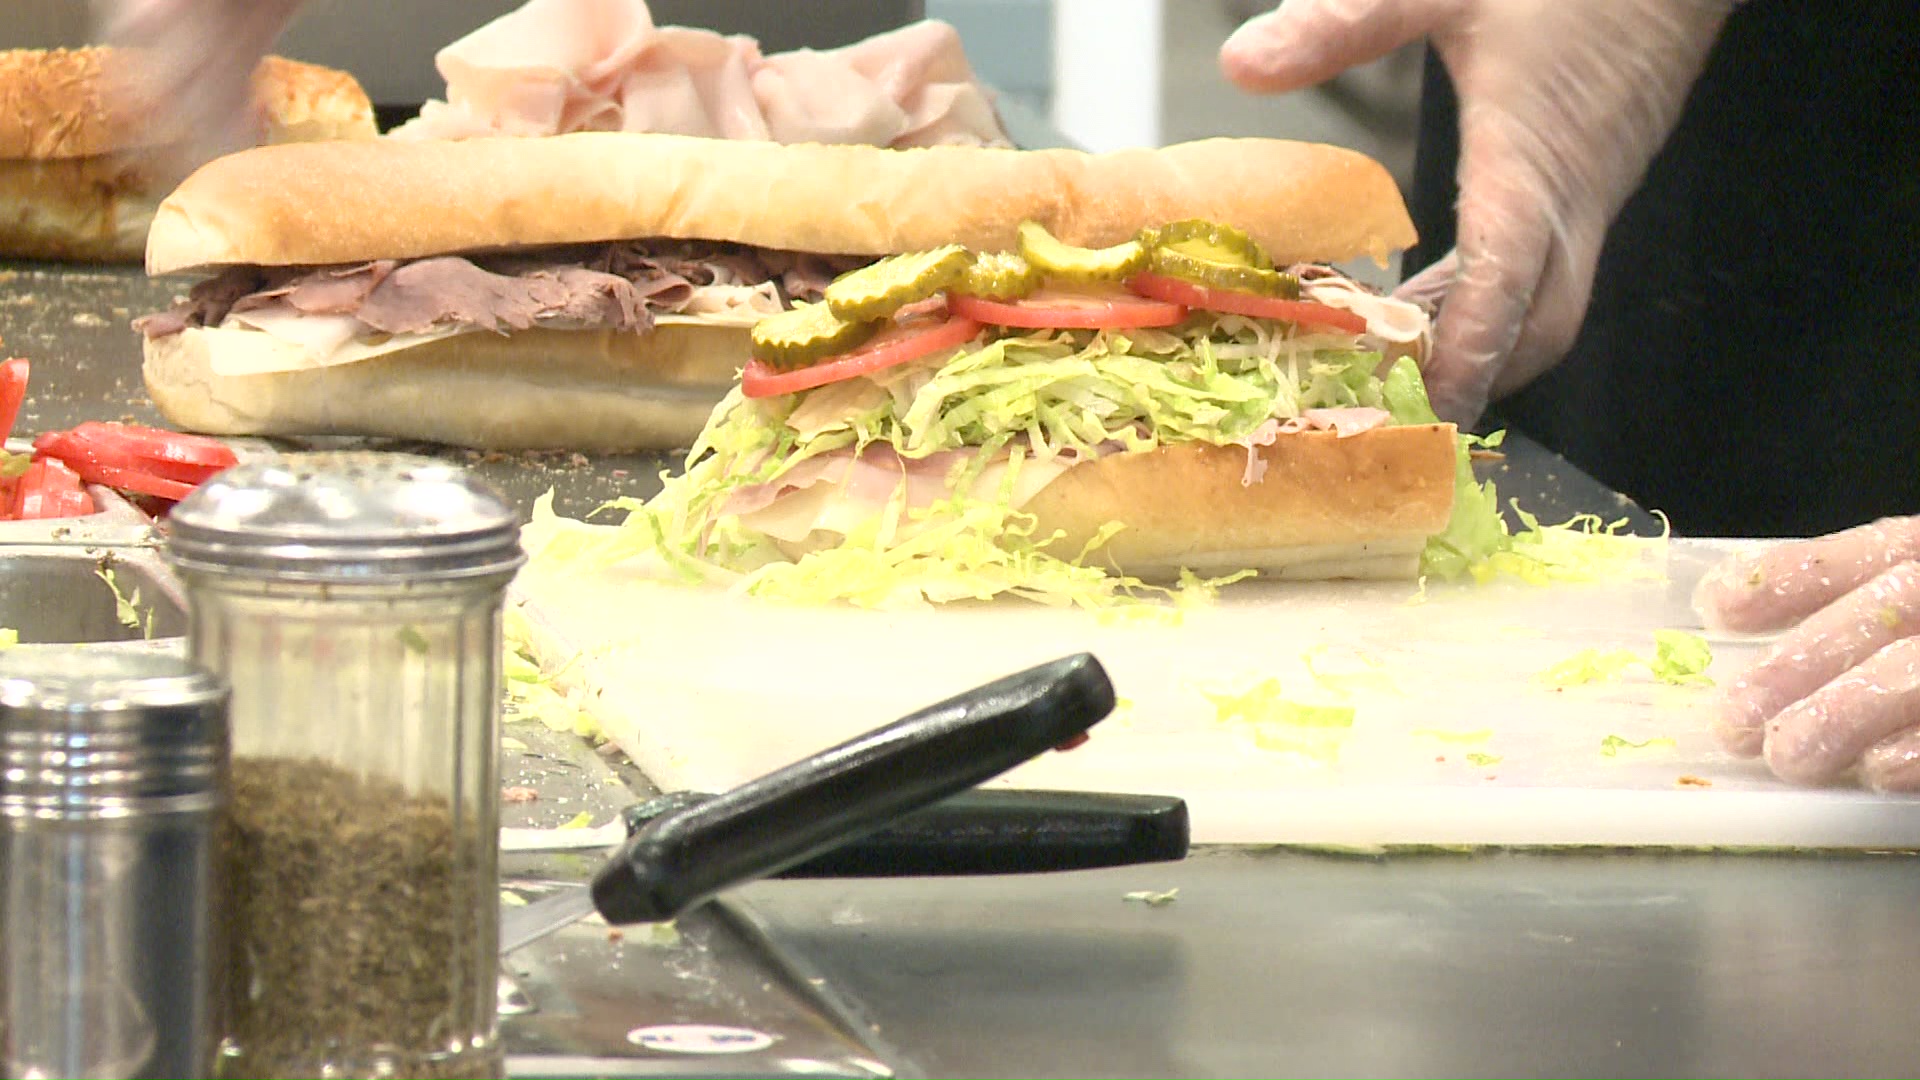 Jersey Mike's opens South Bend location